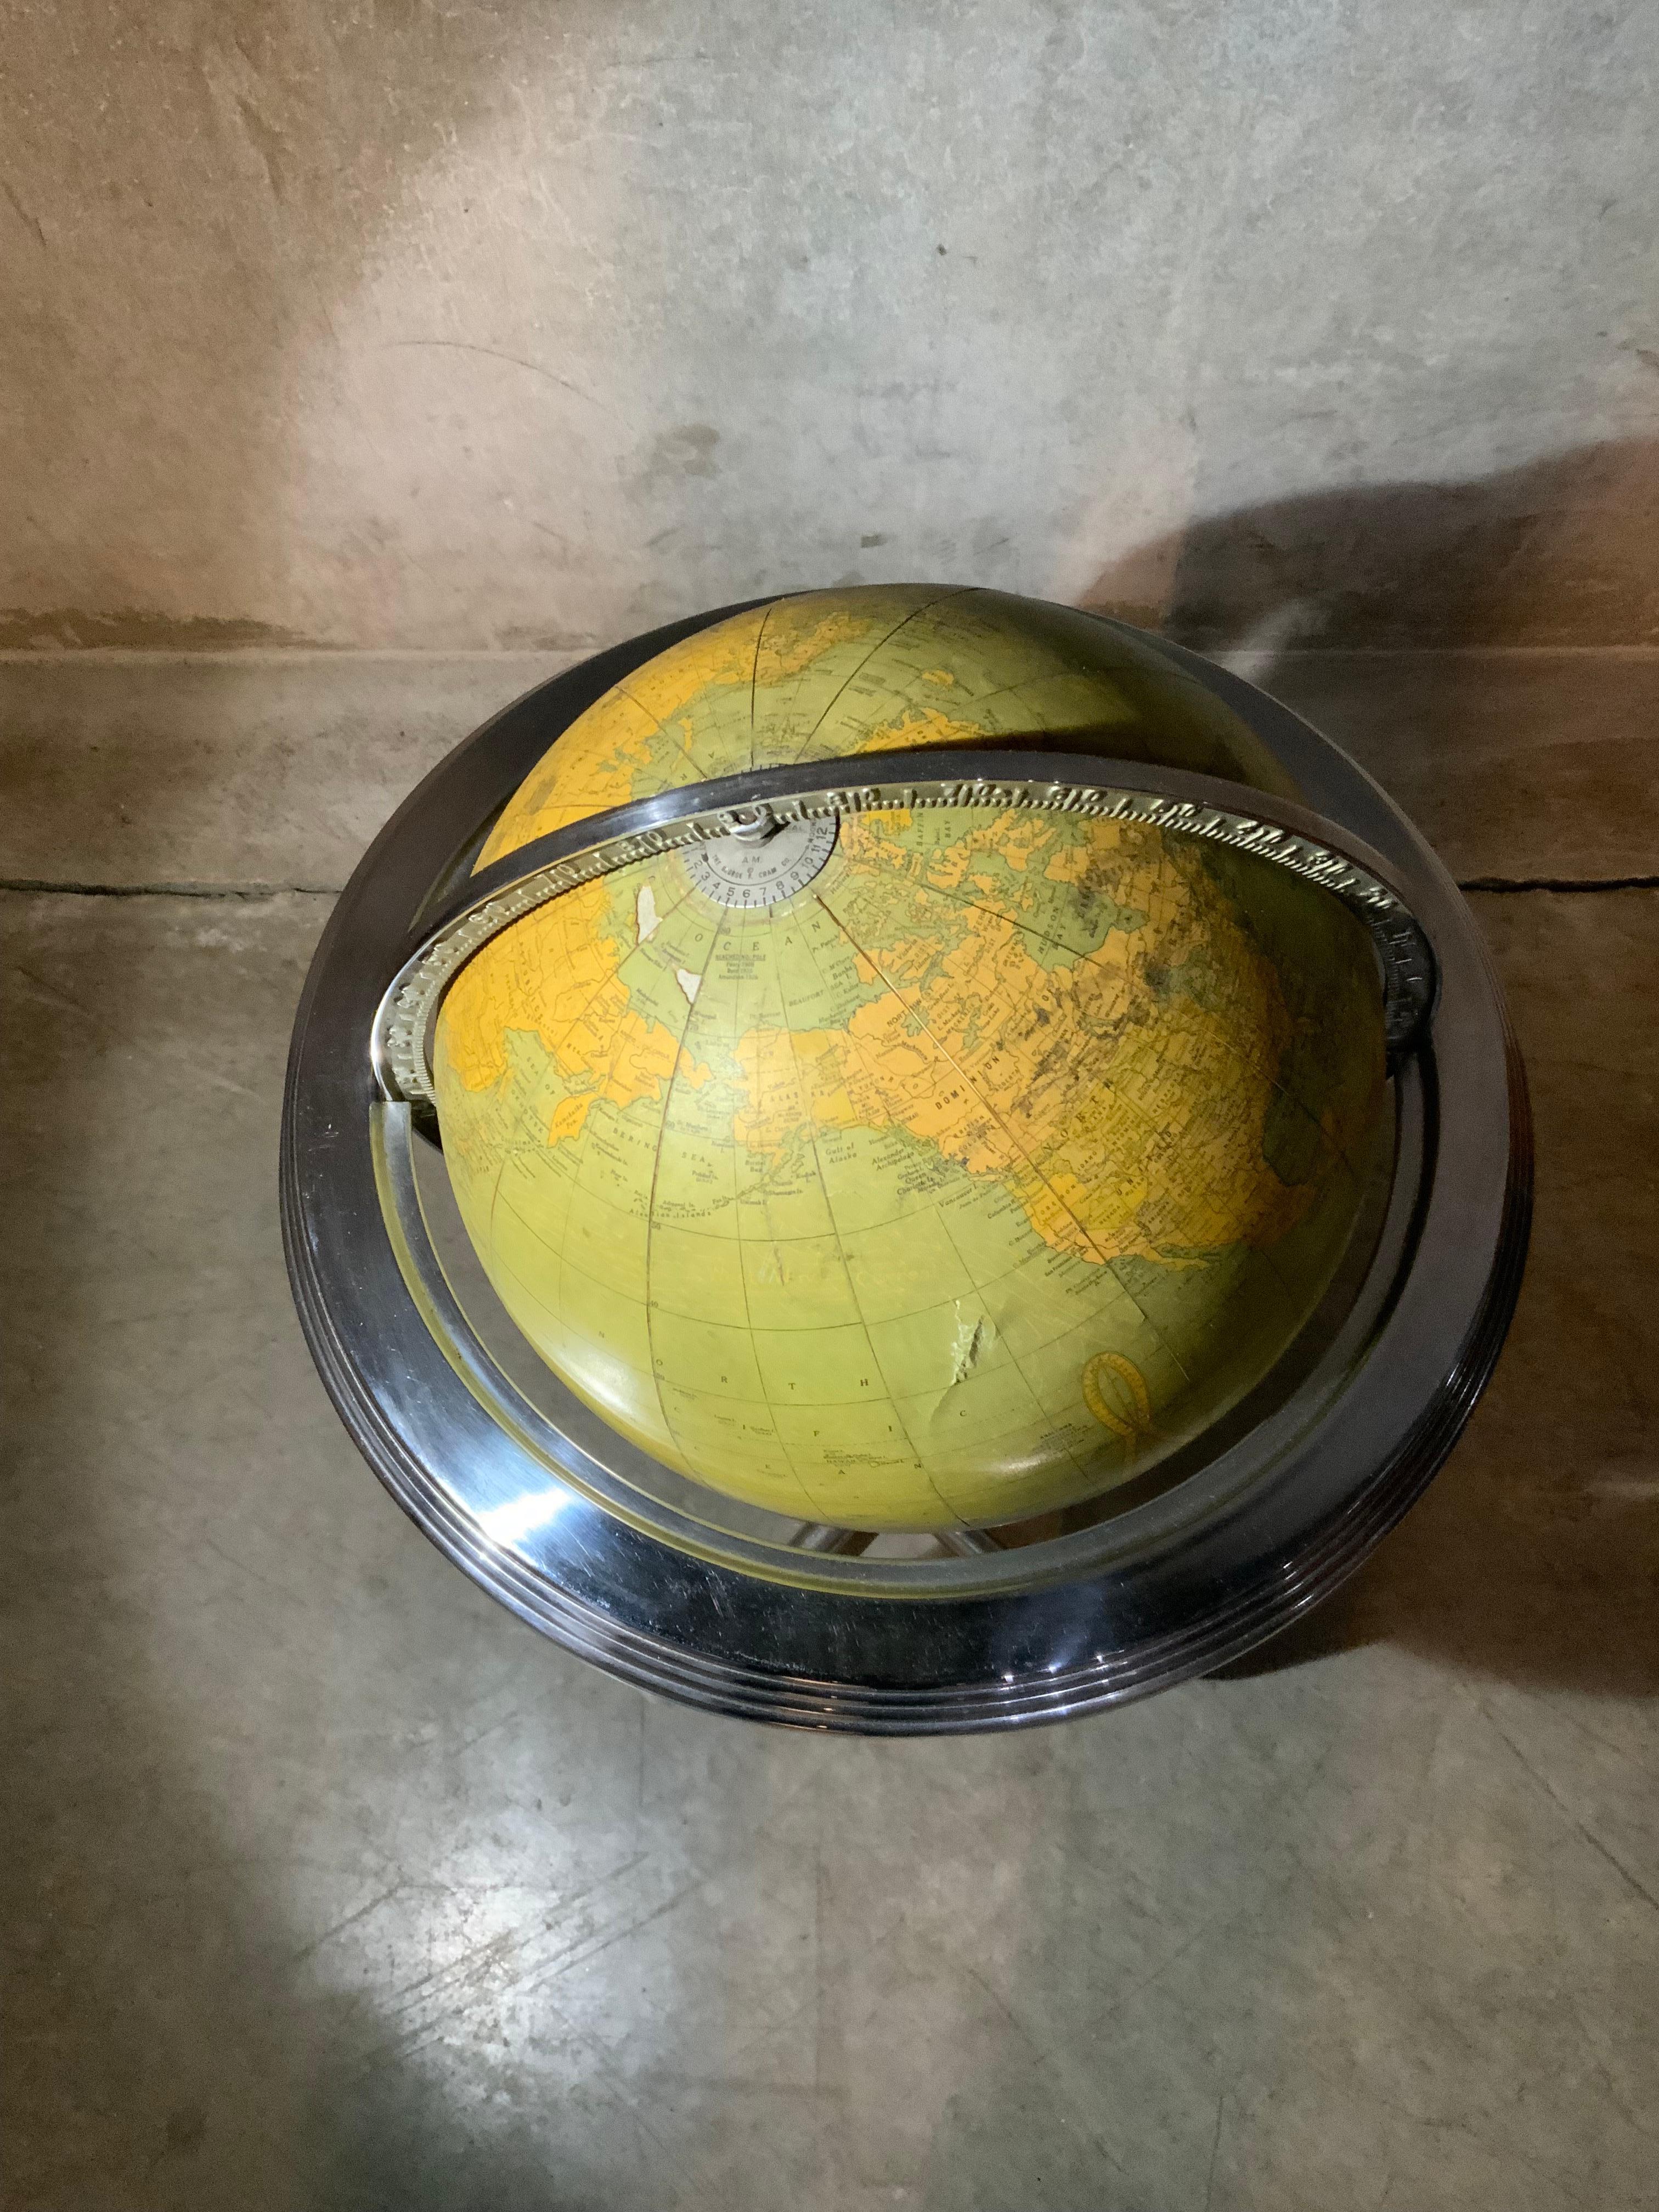 Extremely rare world globe on floor stand in the deco manner, fully functional with nickel finish. Manufactured by Cram who started making globes 135 years ago. This is the only one i've seen with original metal base like this .



Acquired from